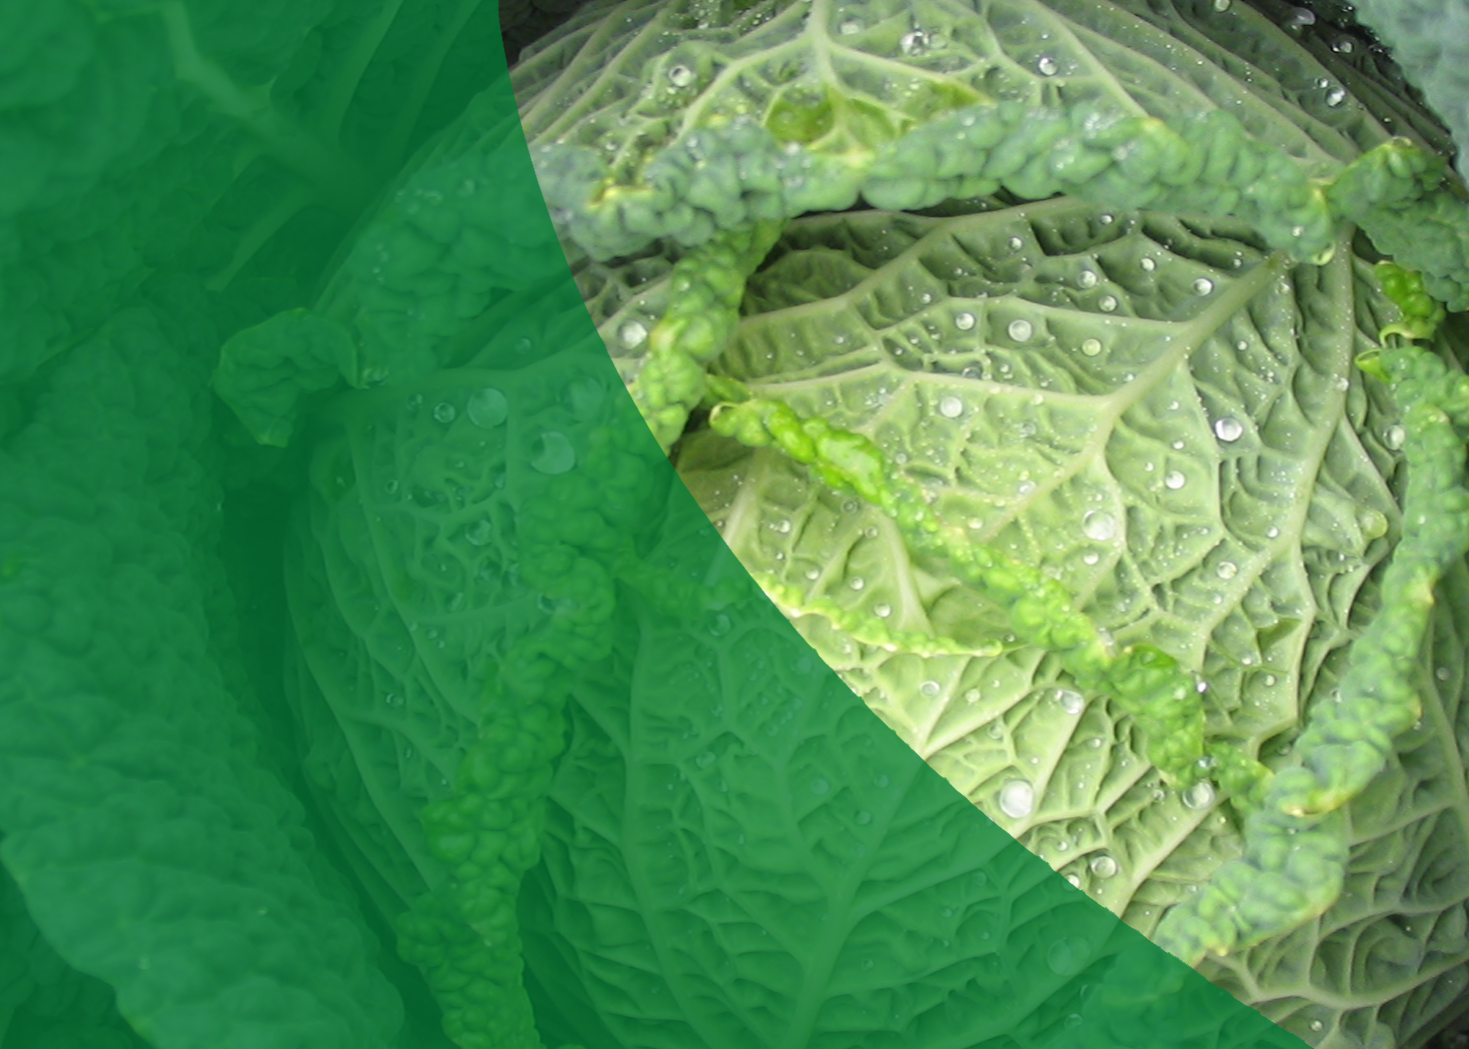 The UK Brassica & Leafy Salad Conference will be held on Wednesday, January 25, next year at the KingsGate Conference Centre in Peterborough.